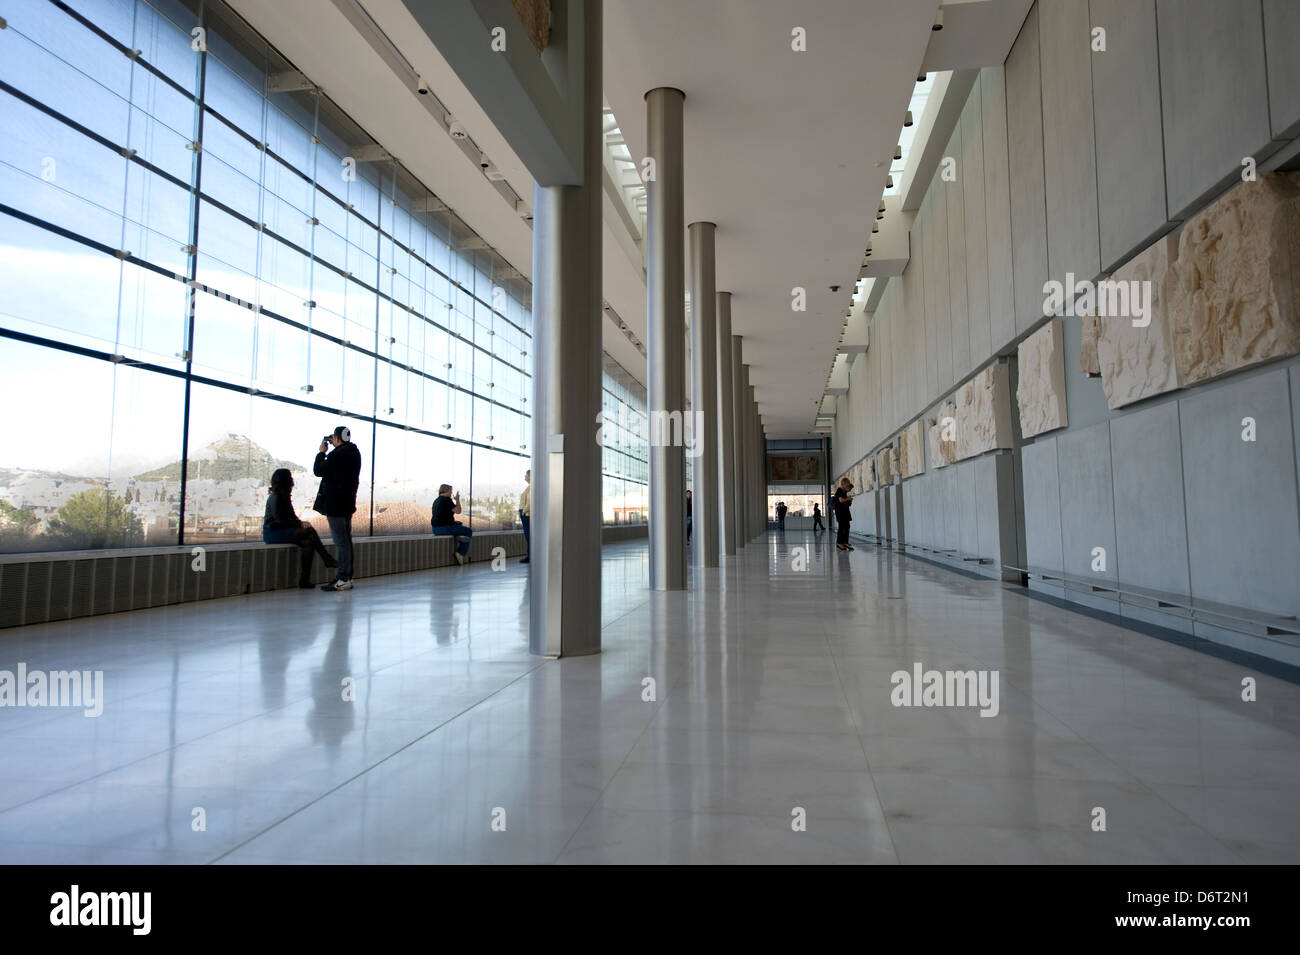 Athens, Greece, March 24, 2013: the Acropolis Museum. Stock Photo